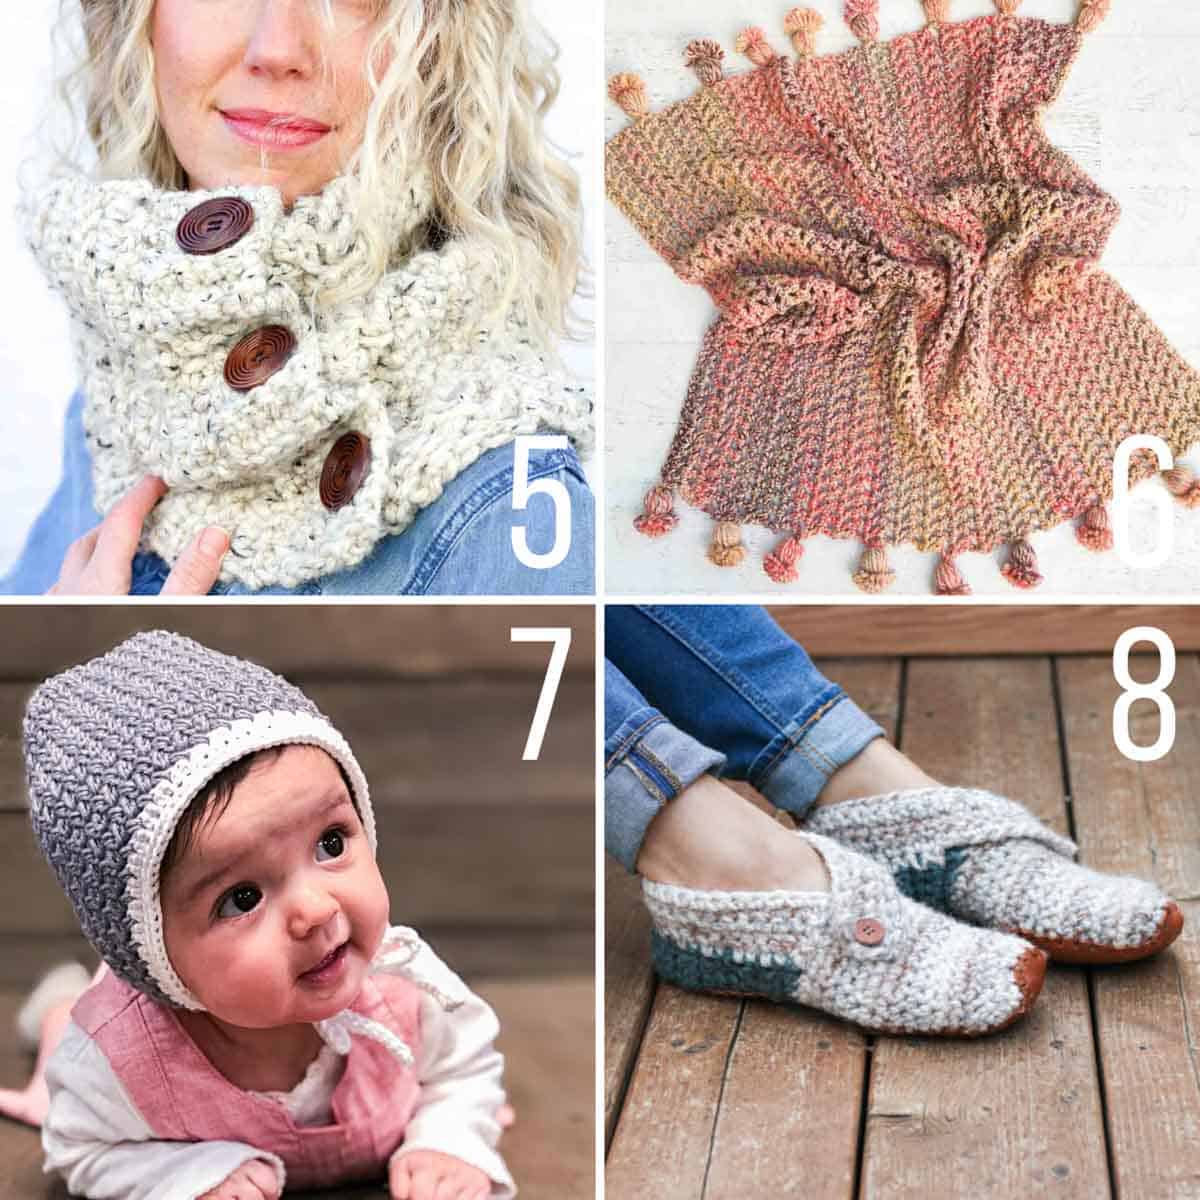 Fast crochet gift ideas including a baby bonnet, a quick crochet afghan, slippers and a cowl.